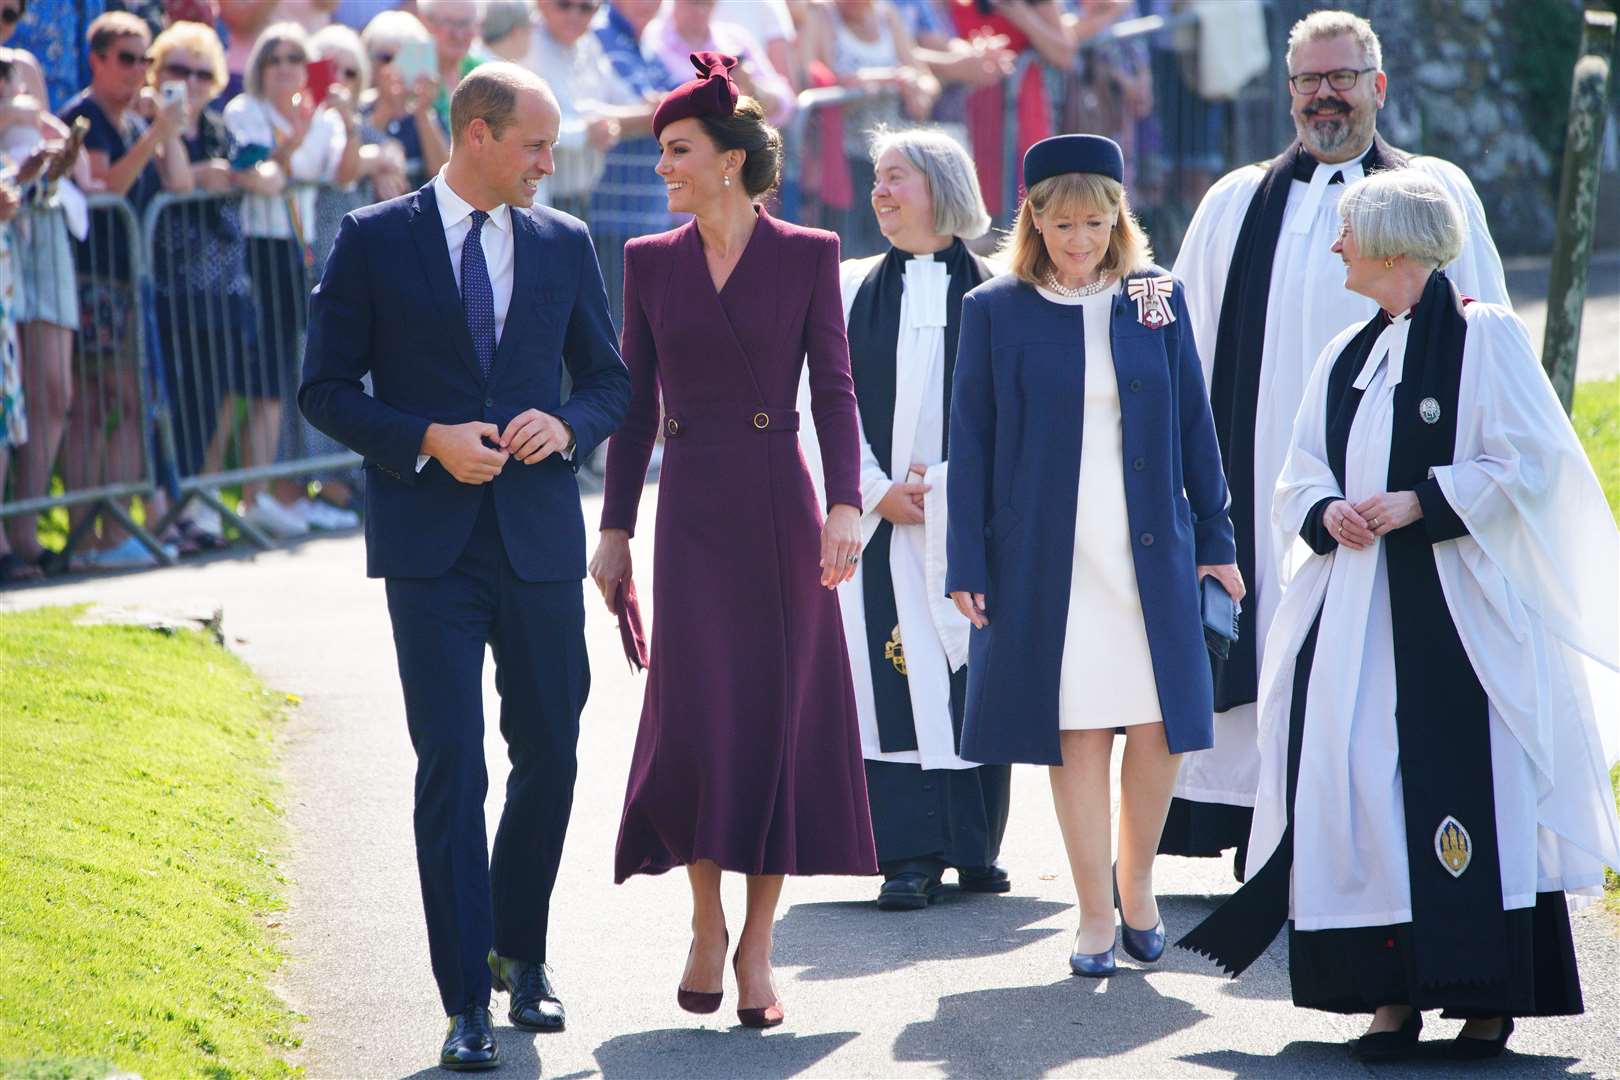 The Prince and Princess of Wales arrive at St Davids Cathedral in Pembrokeshire (Ben Birchall/PA)